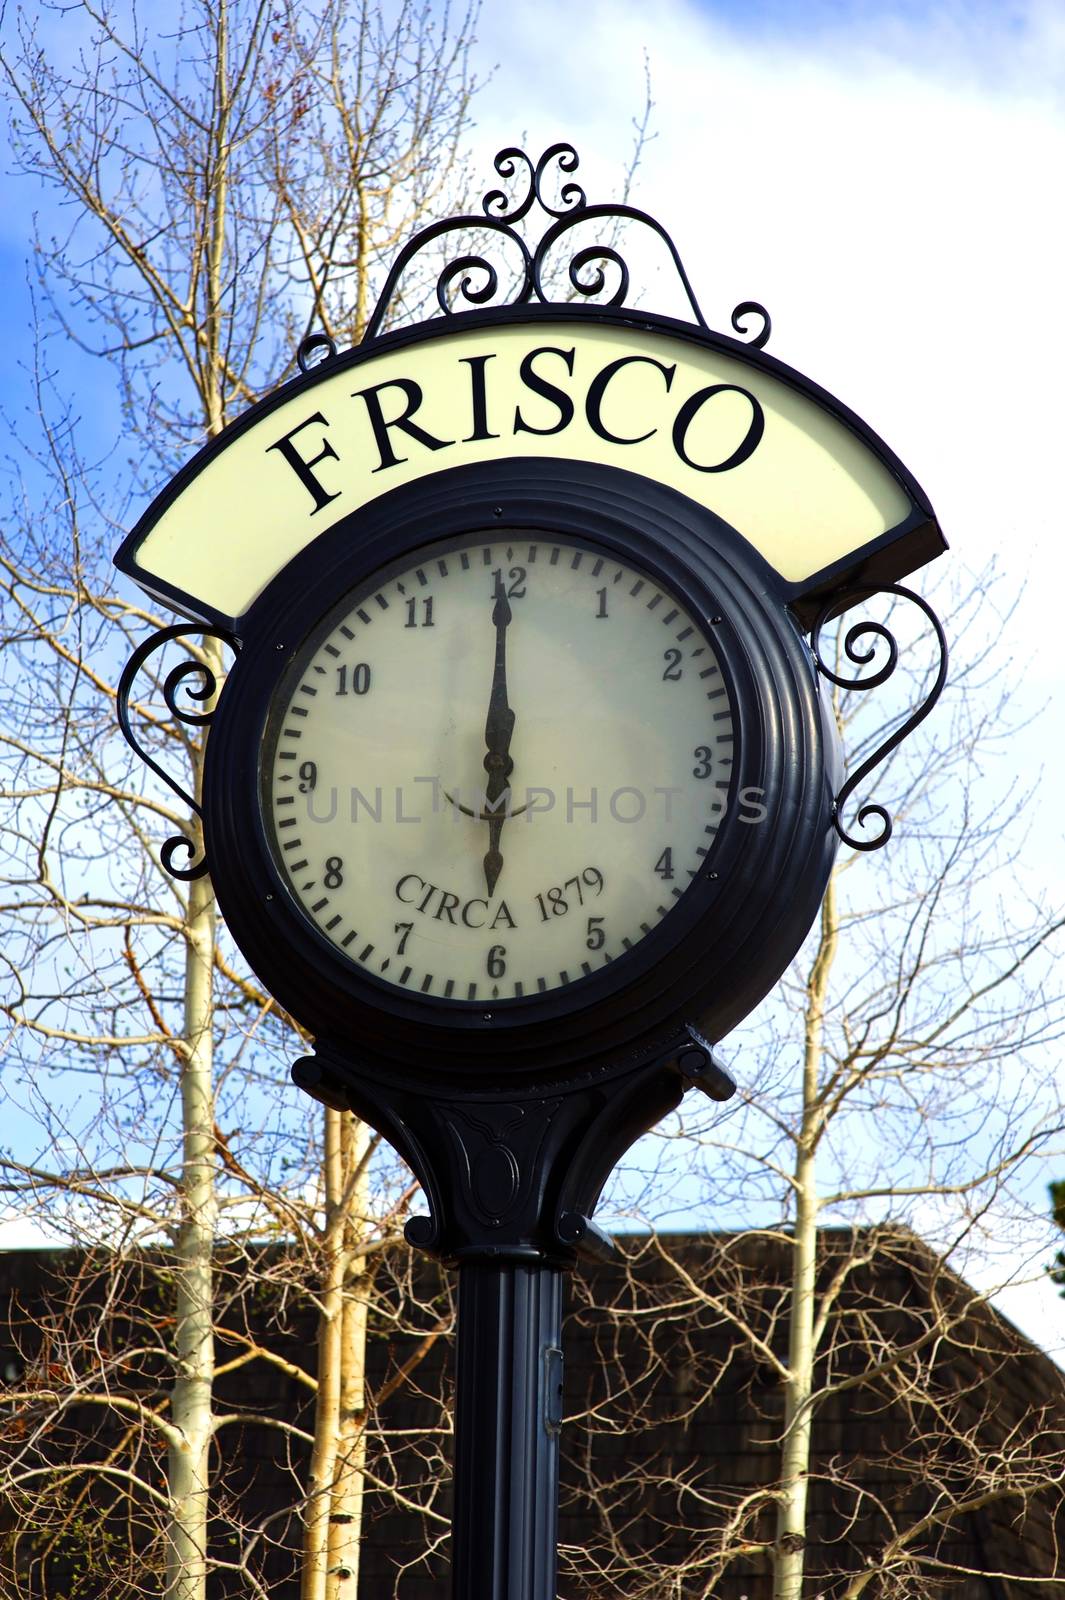 Frisco Colorado. Frisco is a Home Rule Municipality in Summit County, Colorado, United States. Frisco is Located Between Rocky Mountains. Frisco Public Street Watch.